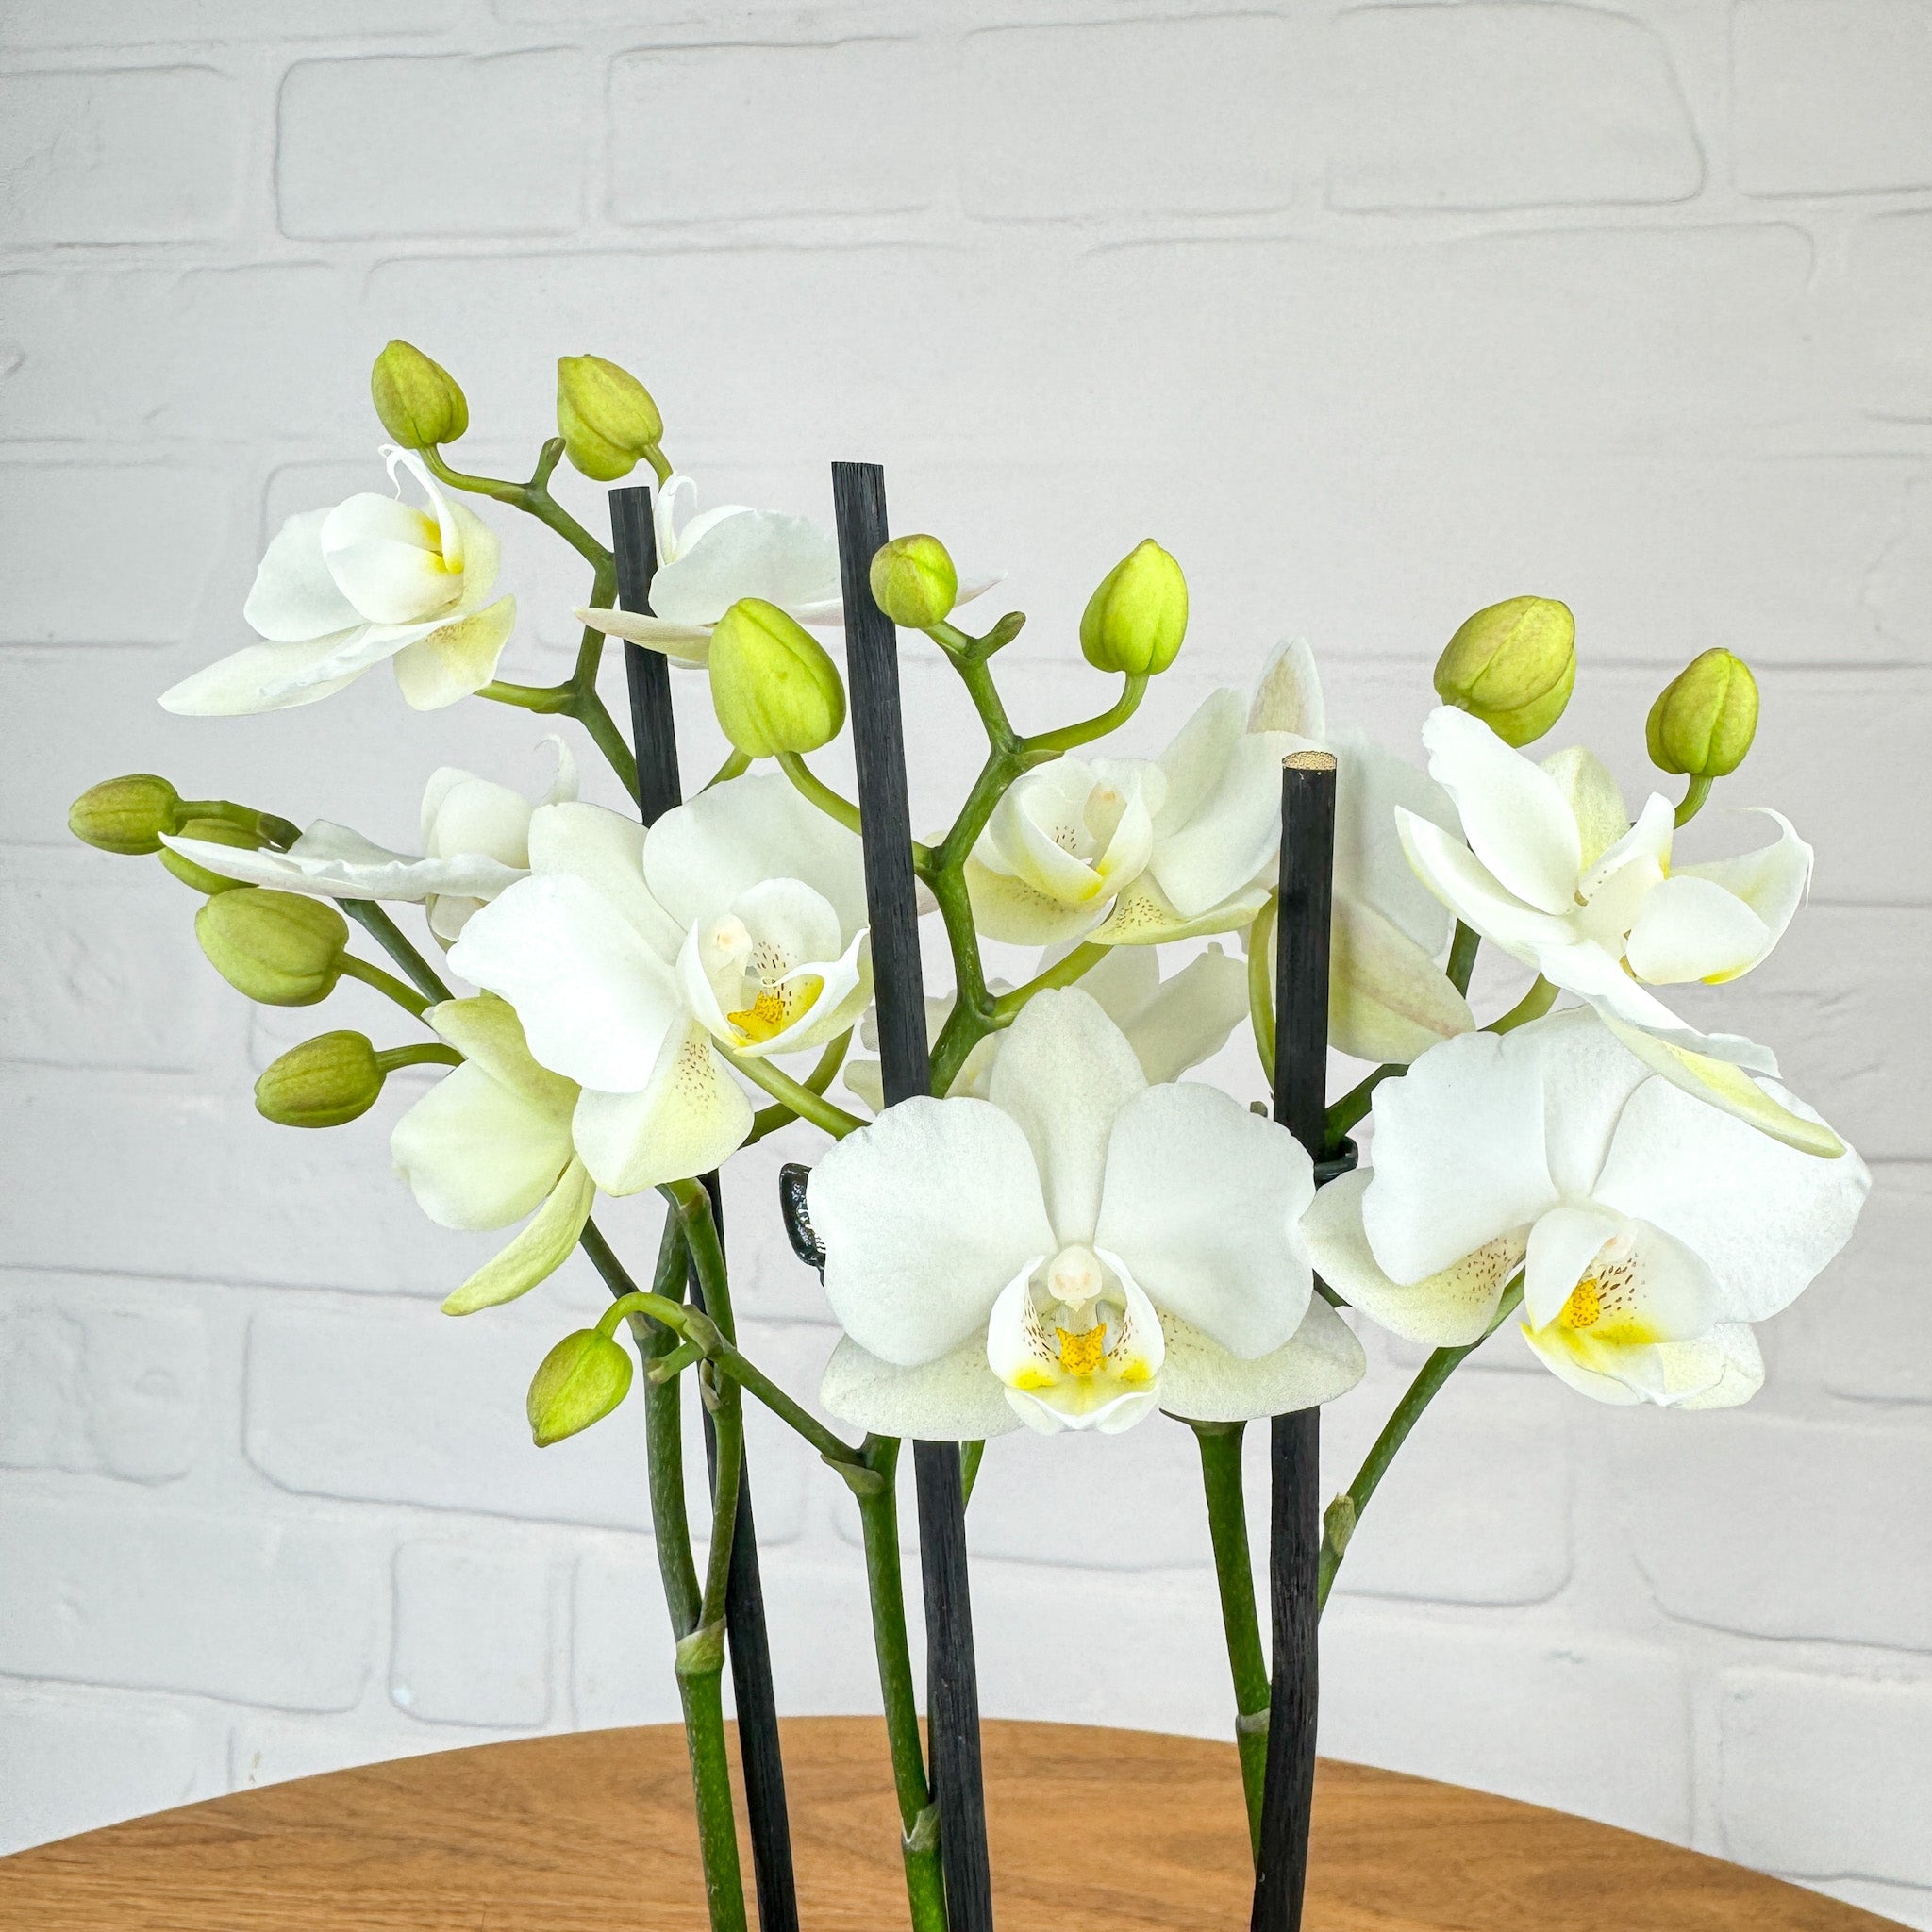 The Collectors: Zurich - Love Orchids